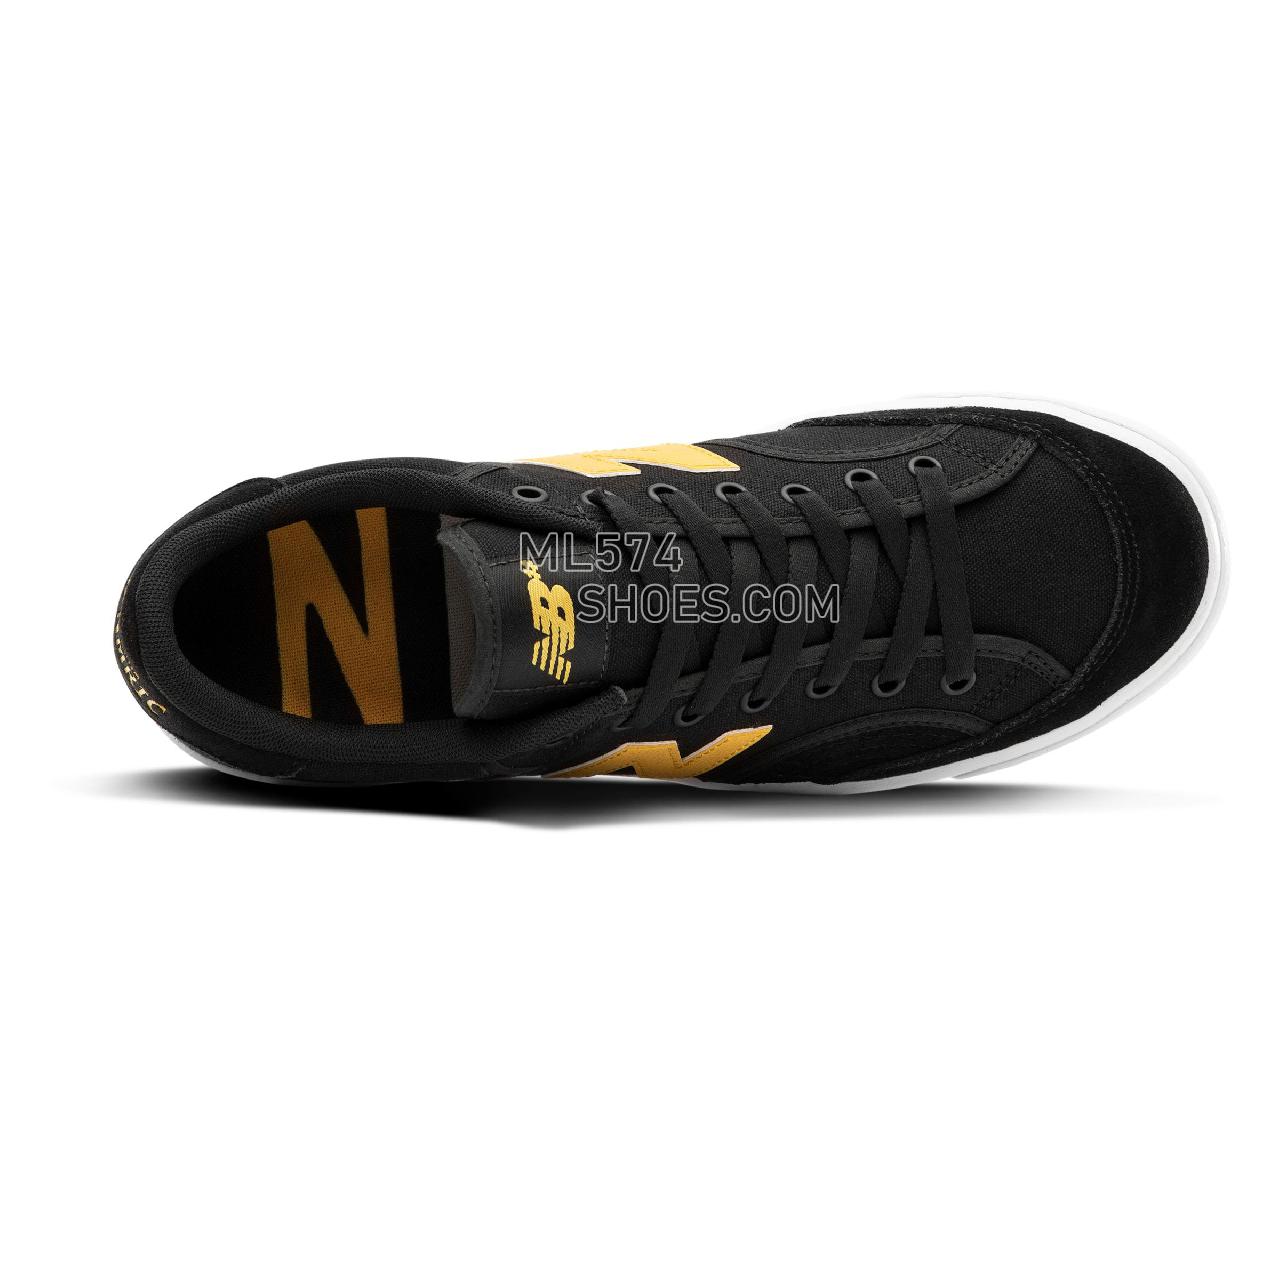 New Balance Numeric 212 - Men's NB Numeric Skate - Black with Yellow - NM212CAL